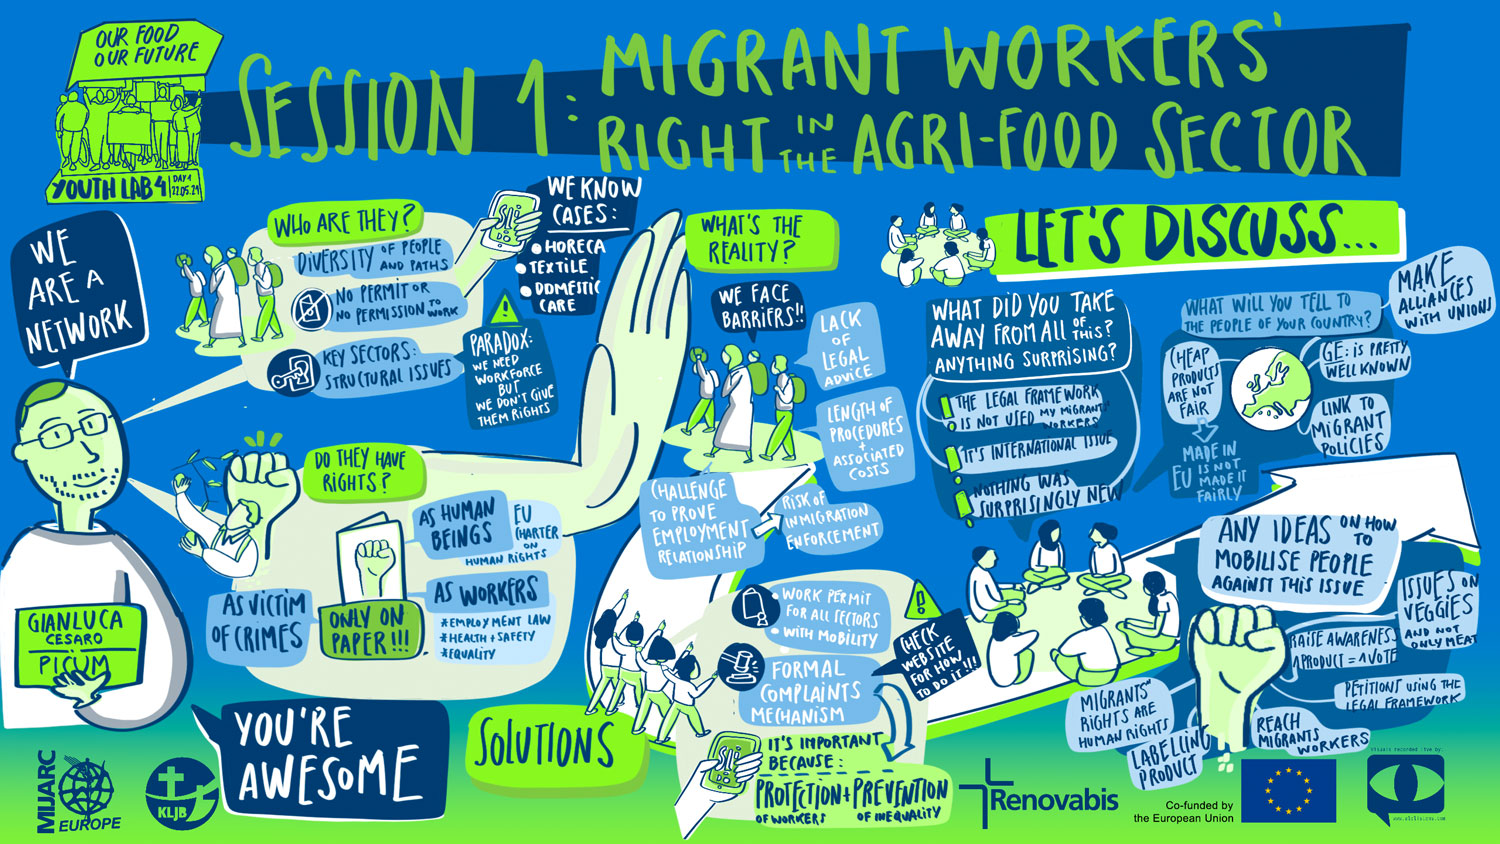 Youth Lab 4: Migrants workers’ rights in the agri-food sector (2)